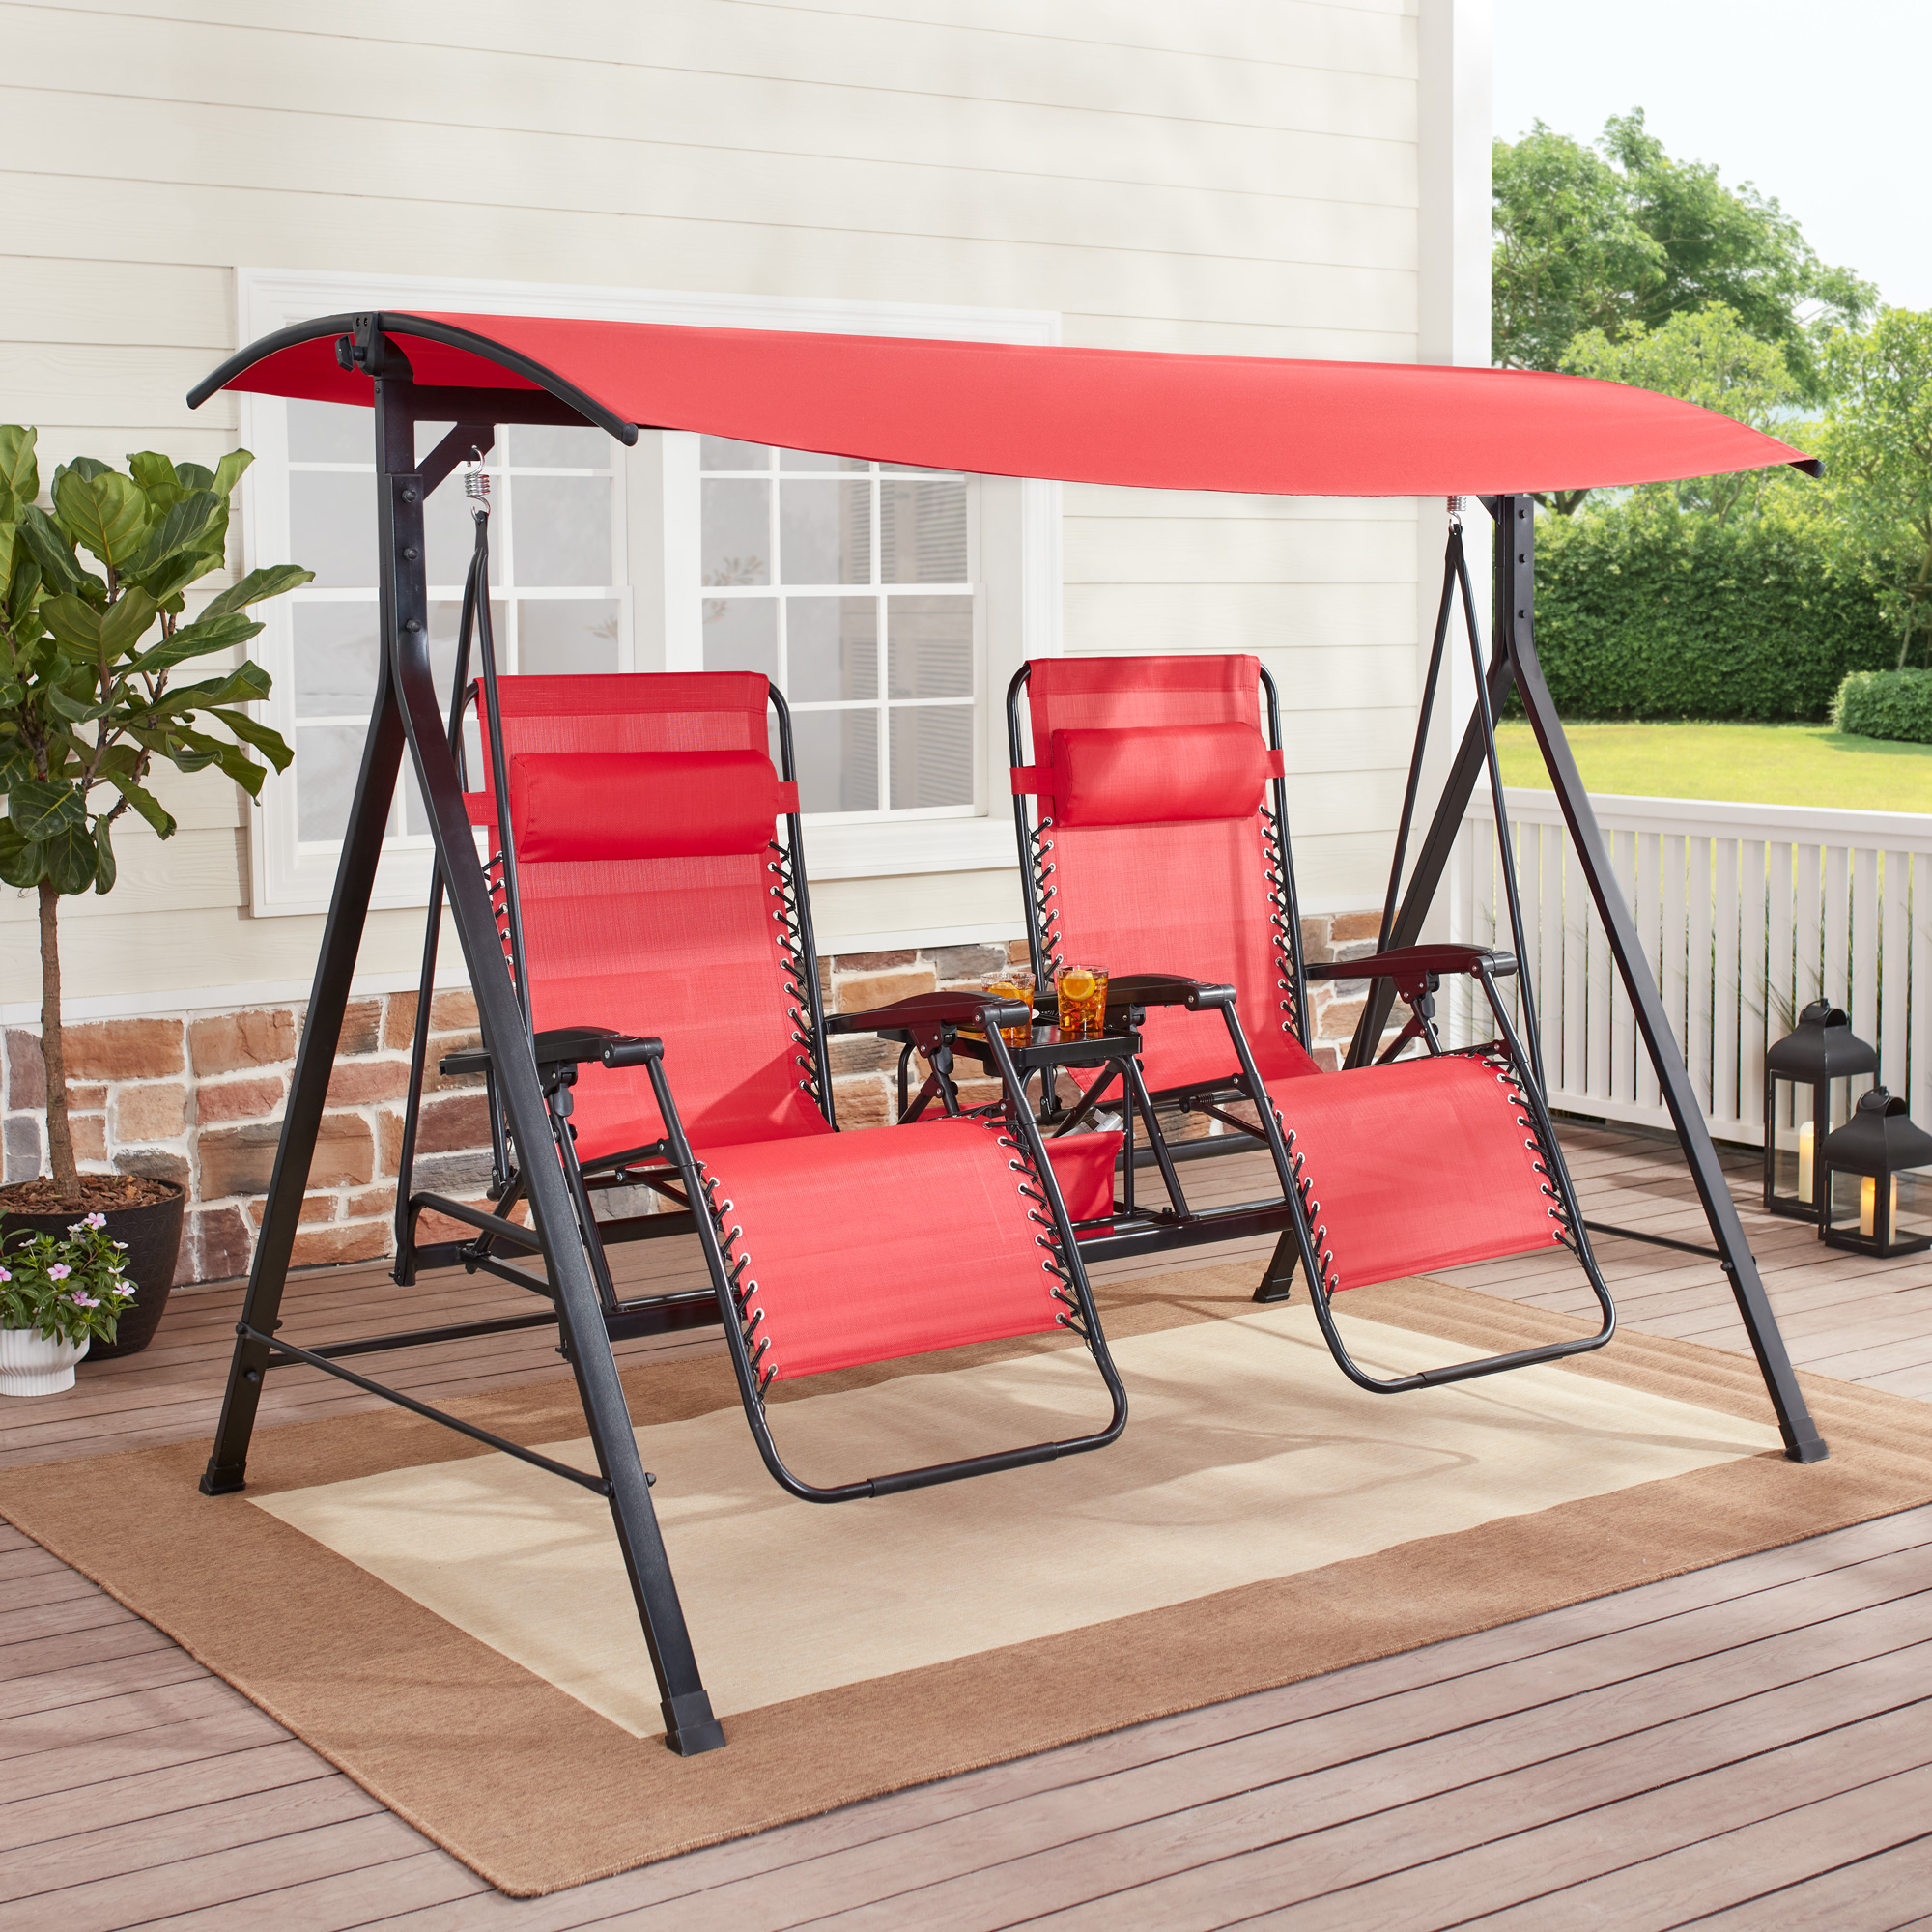 Mainstays 2-Seat Reclining Oversized Zero-Gravity Swing with Canopy and Center Storage Console, Red/Black - image 1 of 9